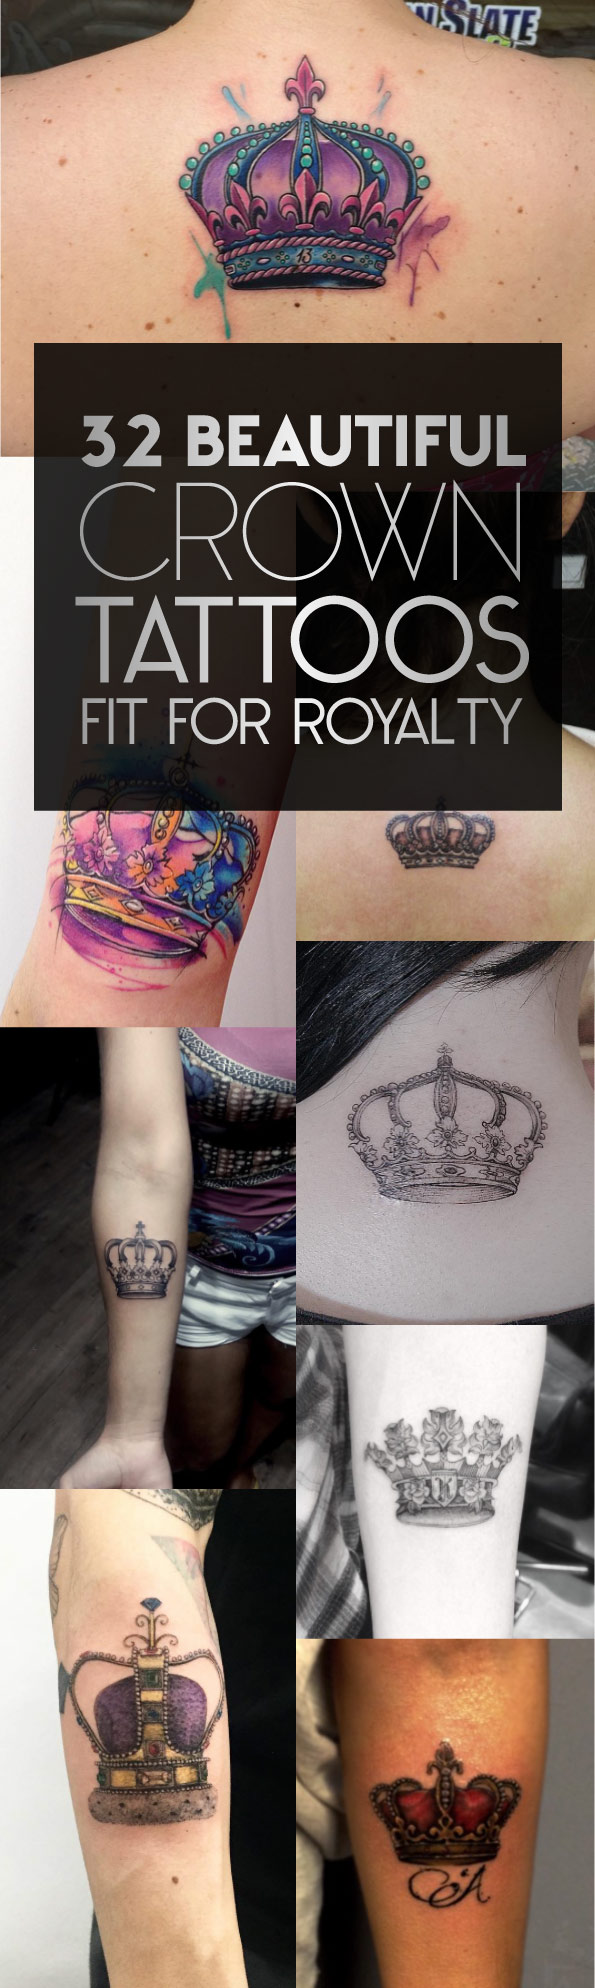 32 Beautiful Crown Tattoos Fit For Royalty | TattooBlend